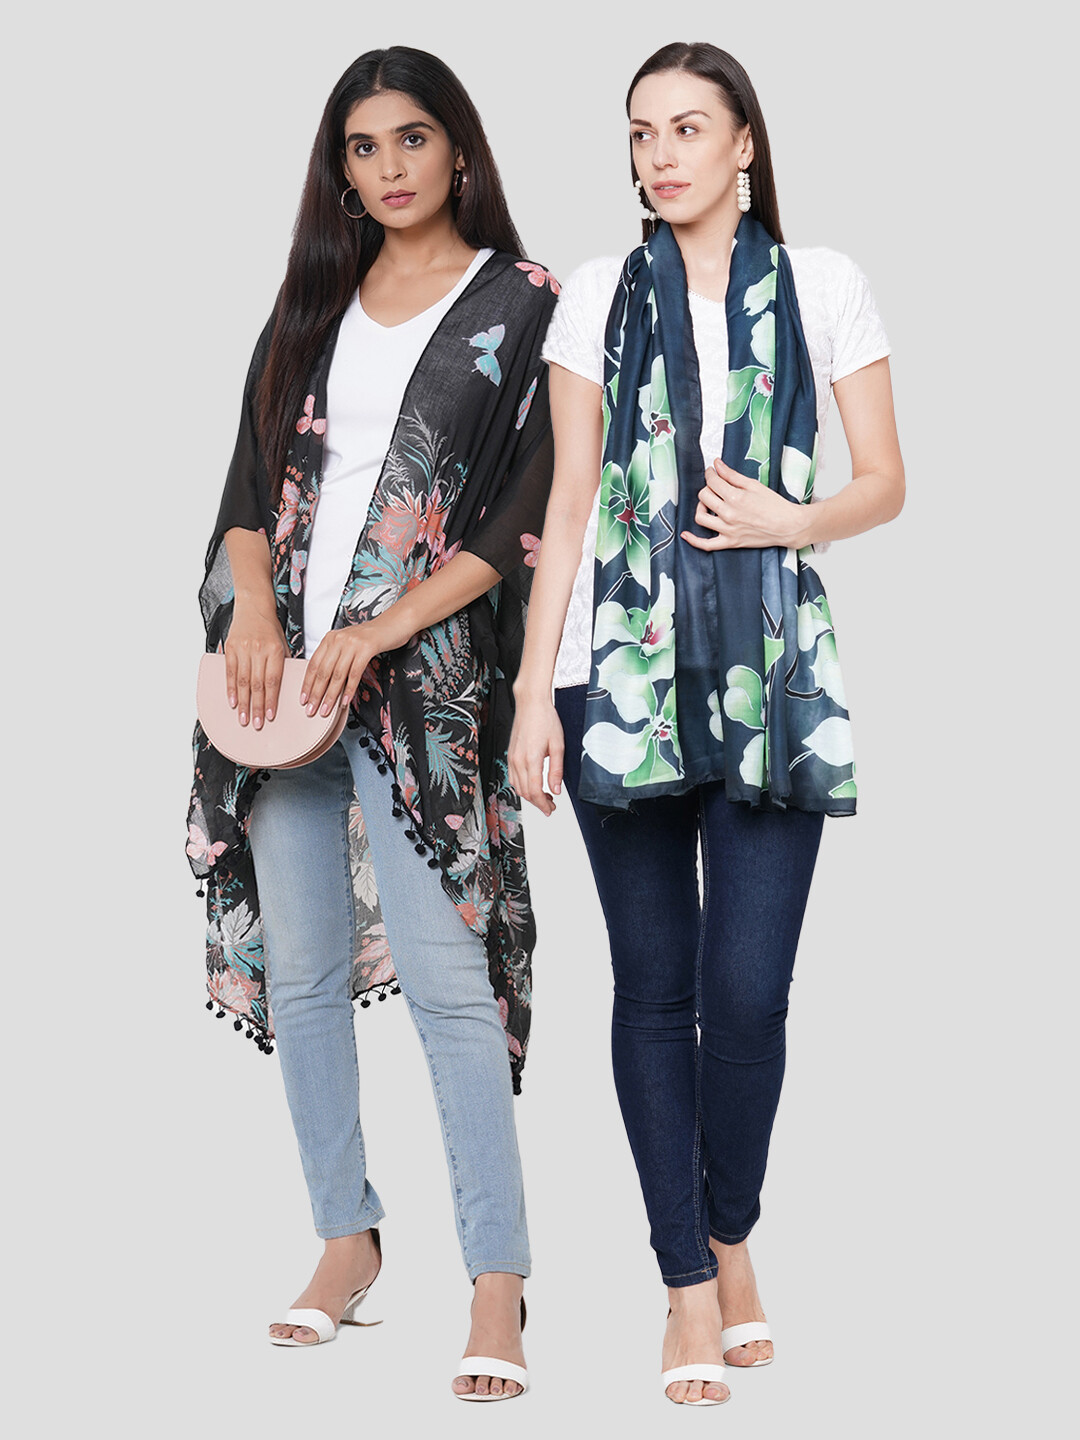 Stylist Printed Ponchos & Digital Printed Scarf - Combo offer